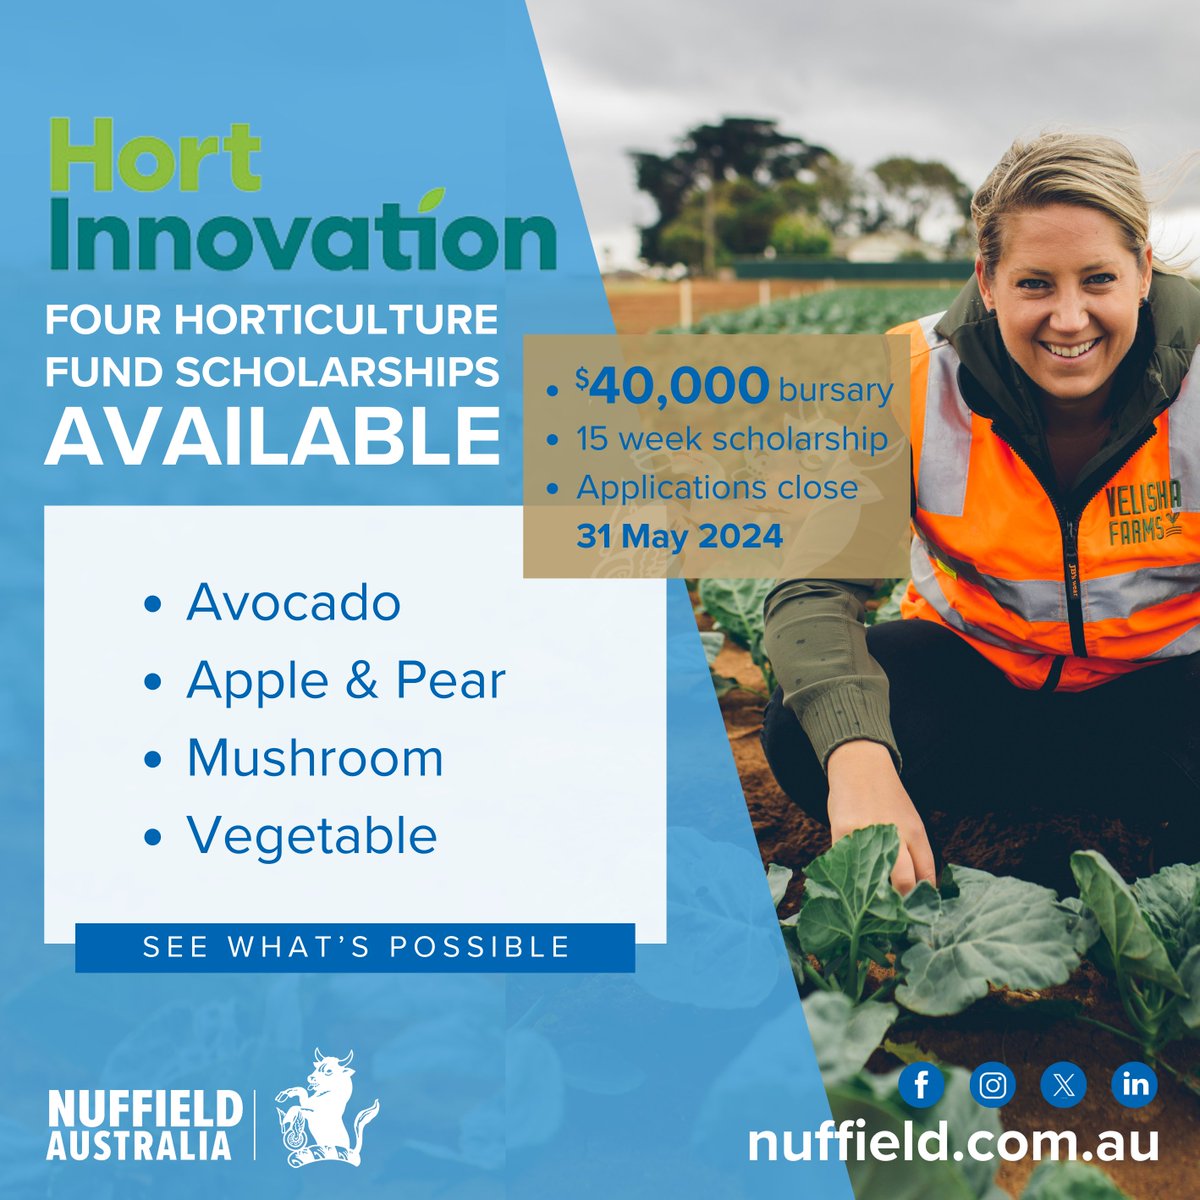 ARE YOU directly involved in avocado, apple&pear, mushroom or vegetable industries in Australia, if so apply for a 2025 Nuffield Scholarship, generously supported by @Hort_Au

Apply today: nuffield.com.au/how-to-apply 

#nuffieldag #aussiefarmers #futurefarmers #hortinnovation